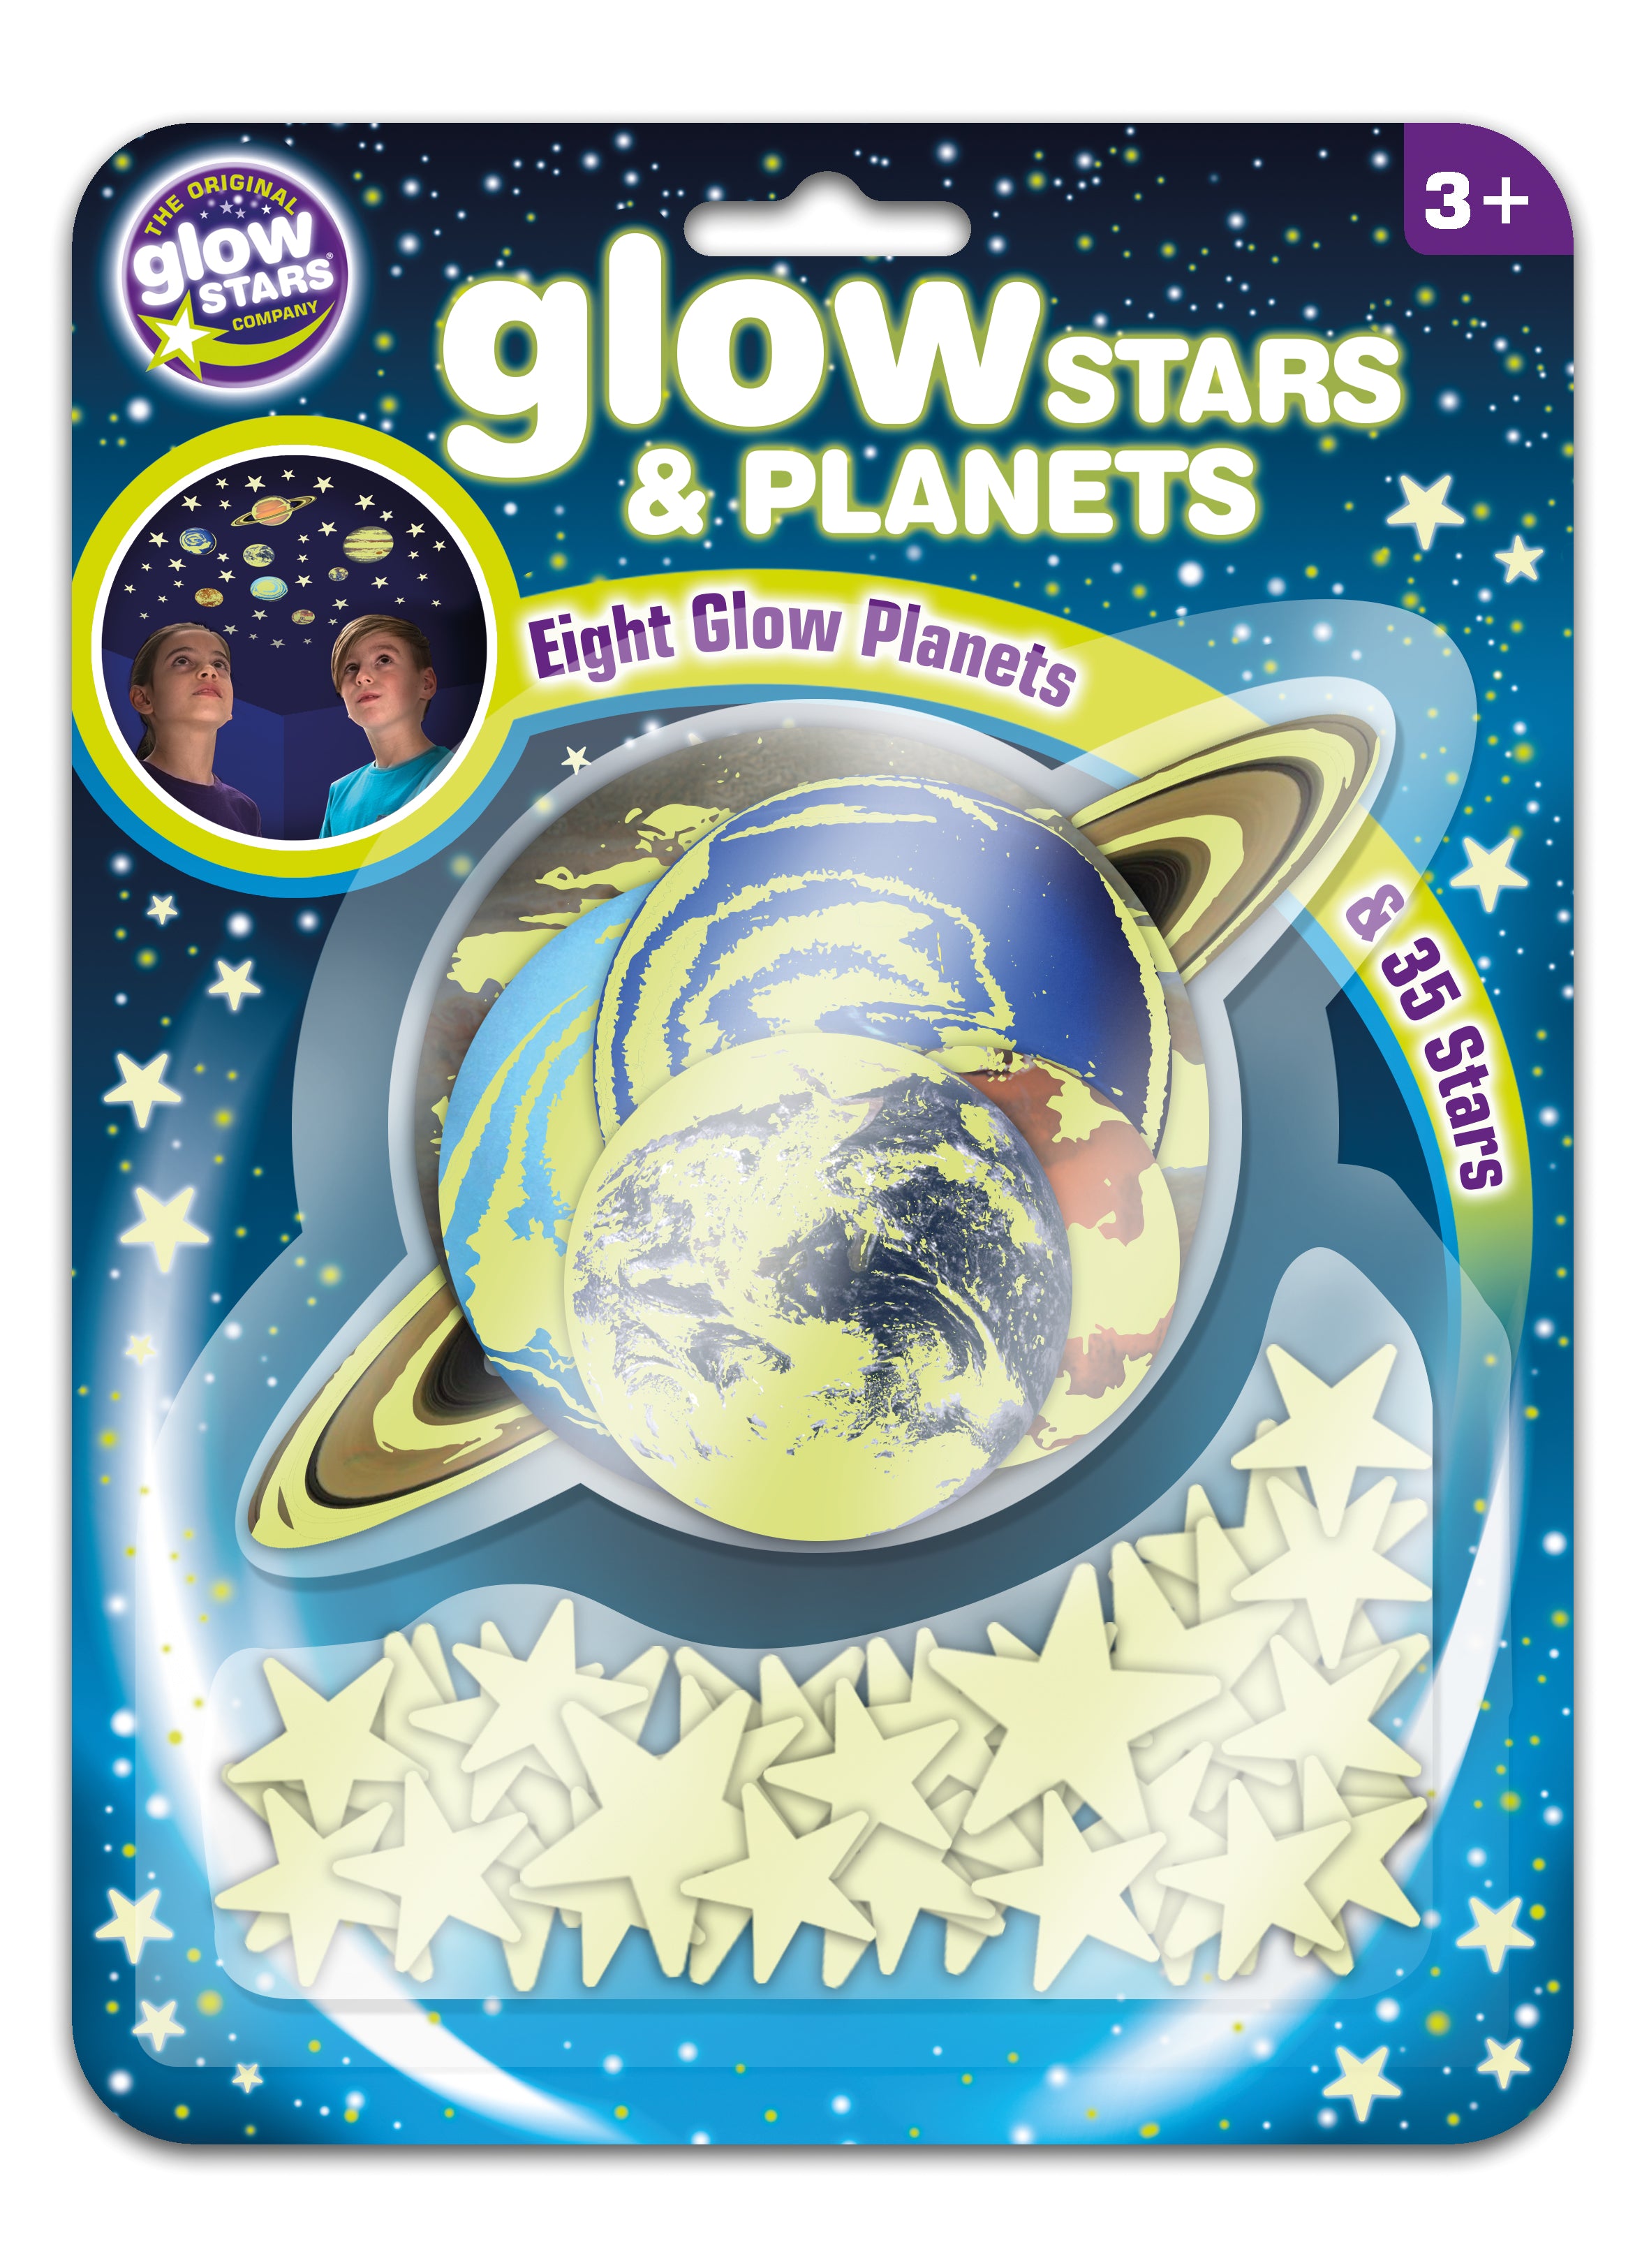 Glow Stars And Planets 8 Planets + 35 Stars - Taylorson